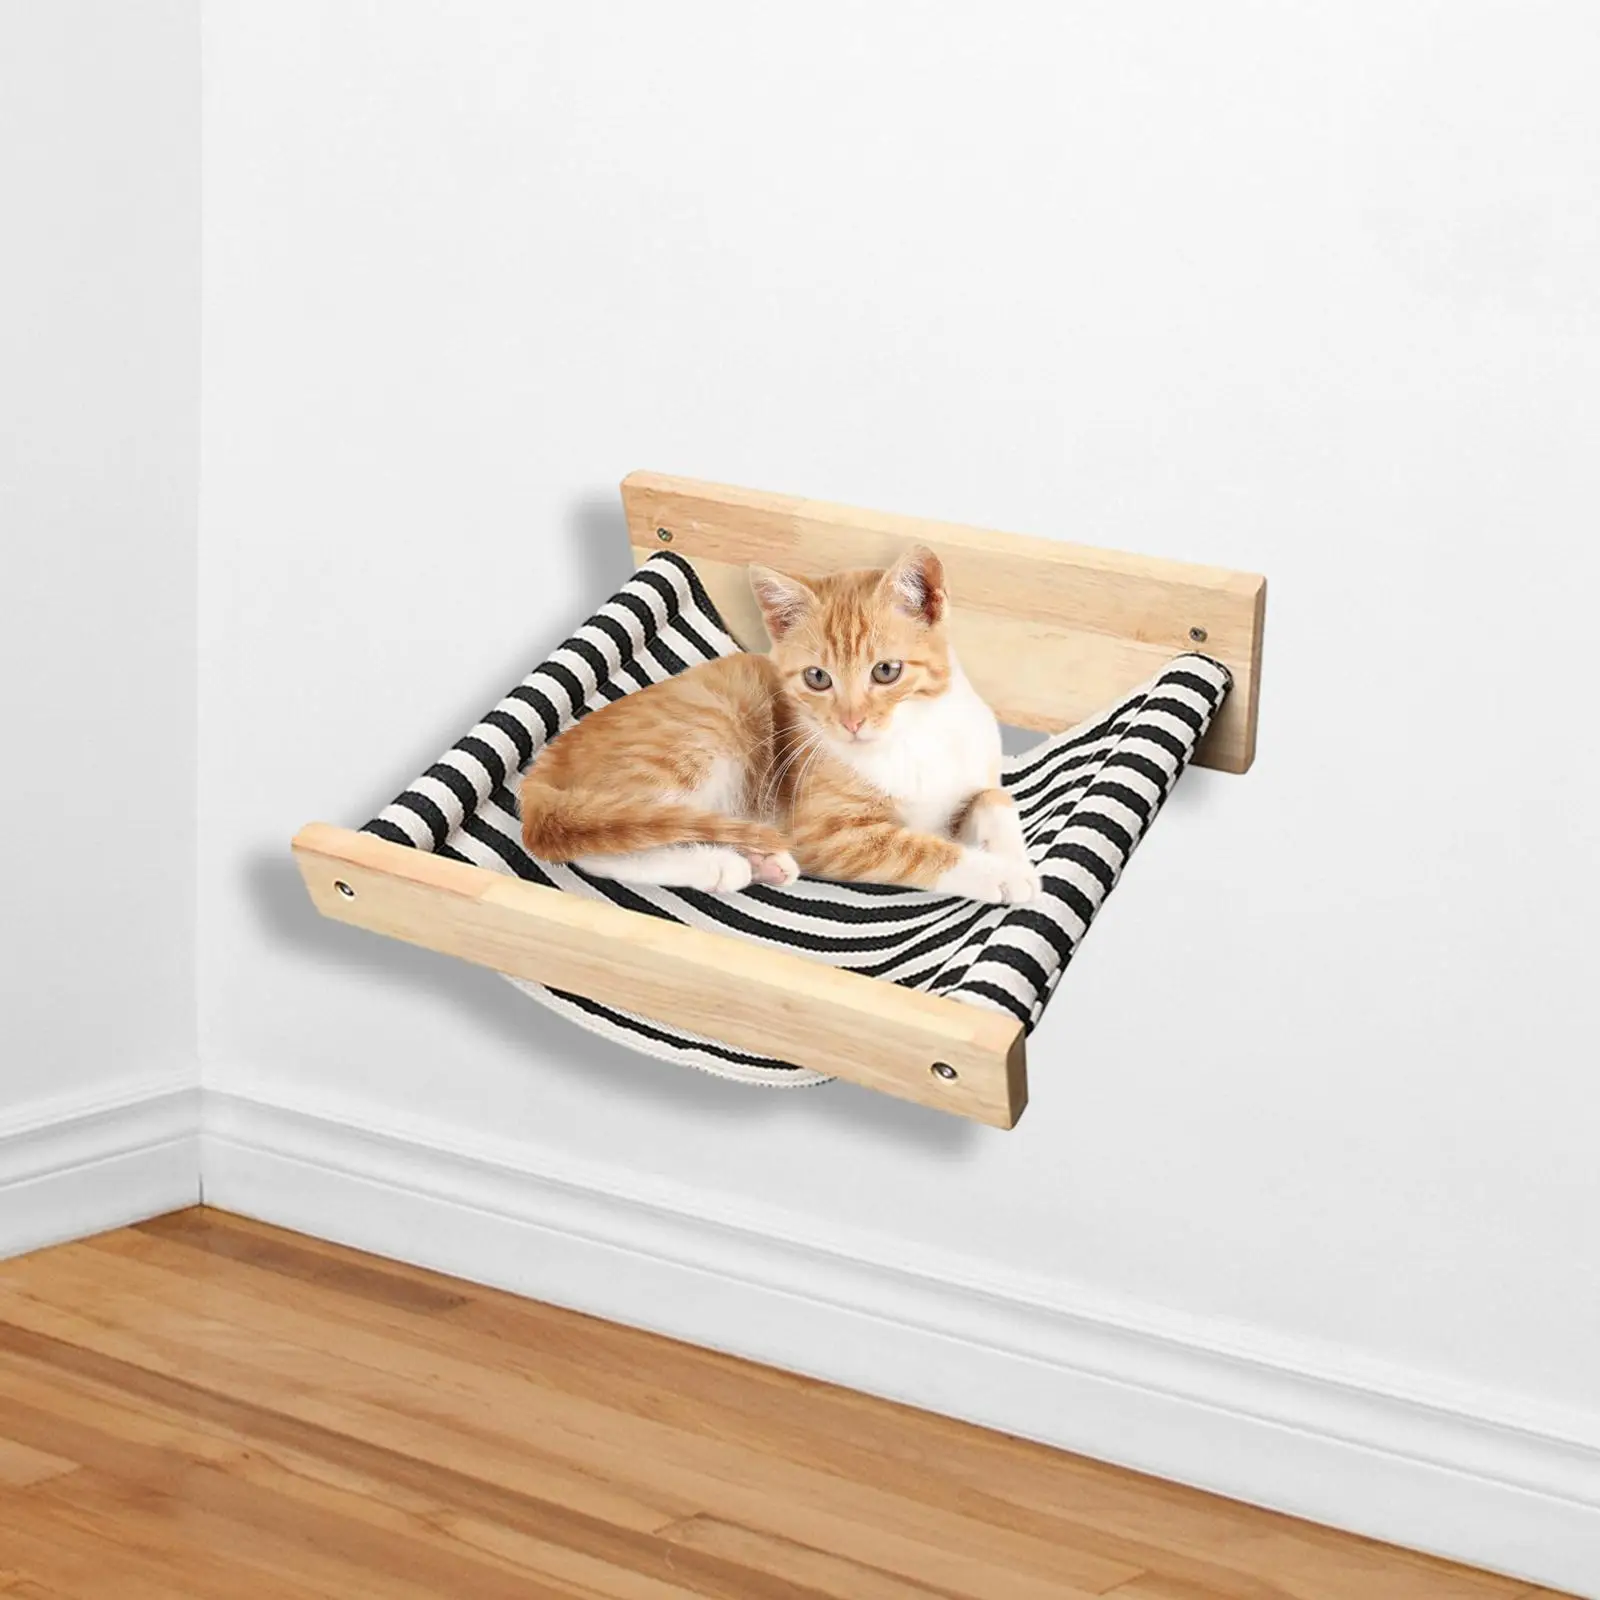 Cat Hammock Wall Mounted Solid Modern Lounging Space Saving Cat Perches for Indoor Cats Sleeping Playing Cats Wall Shelves